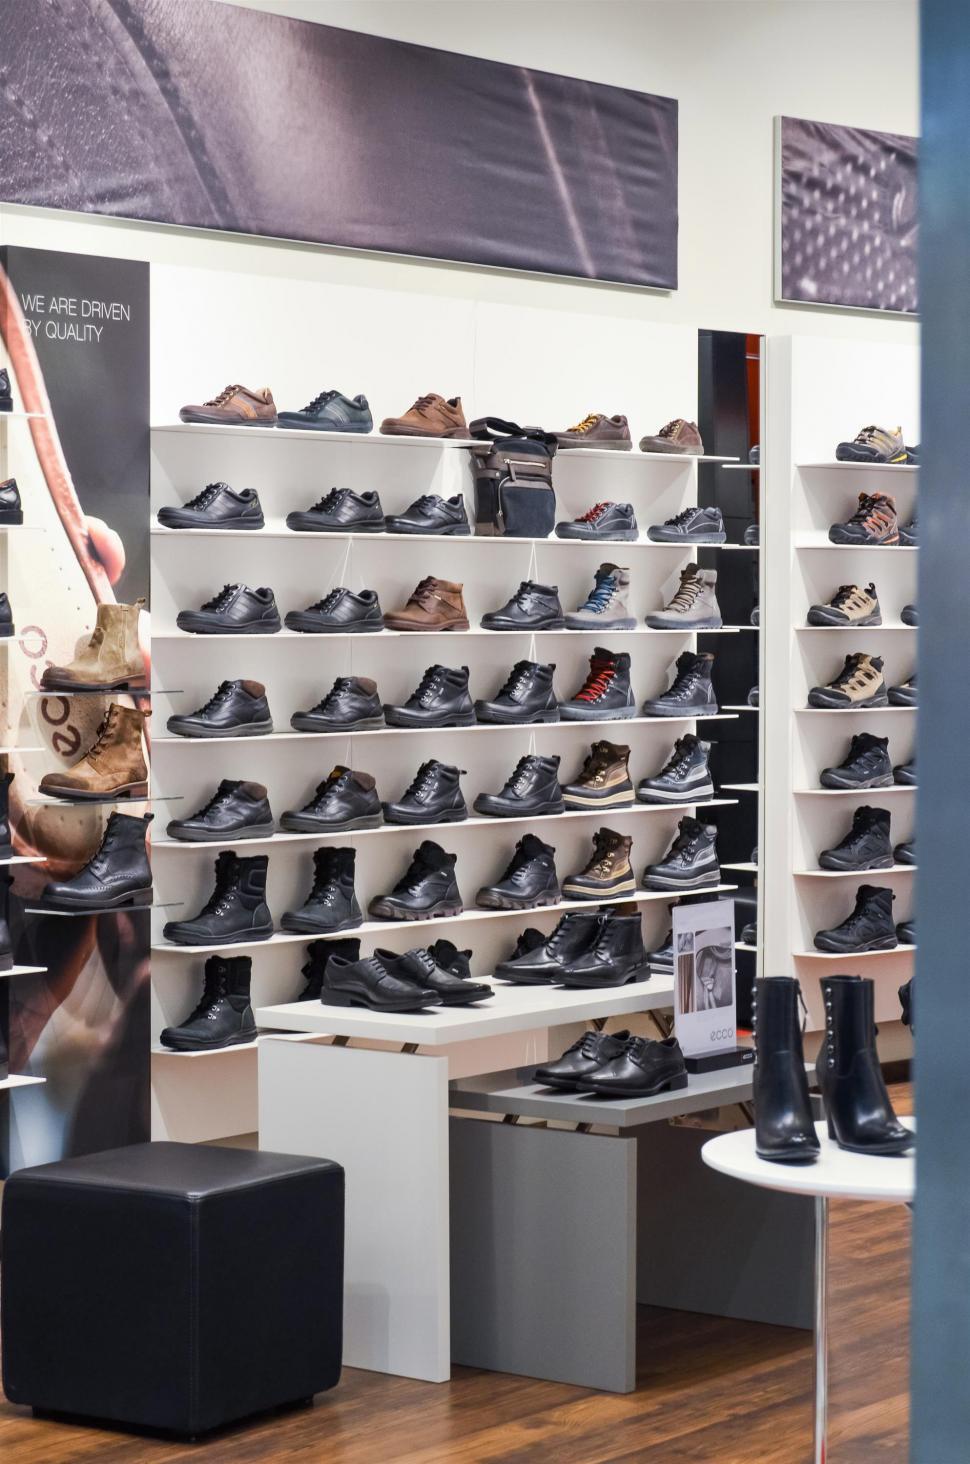 Free Image of Variety of Shoes Displayed in Shoe Store 